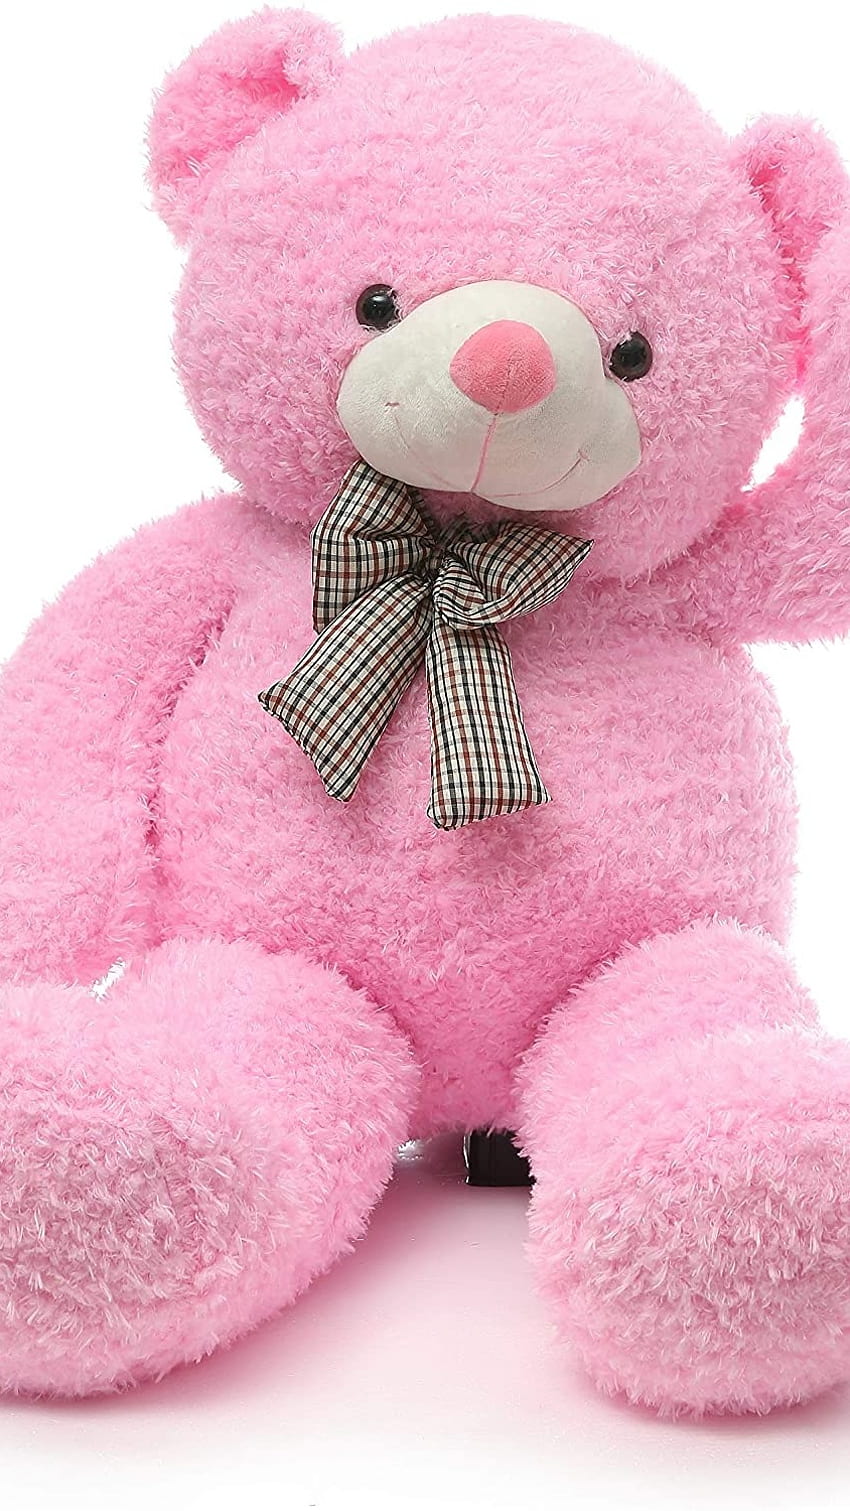 Top 999+ pink teddy bear images hd – Amazing Collection pink teddy bear images hd Full 4K